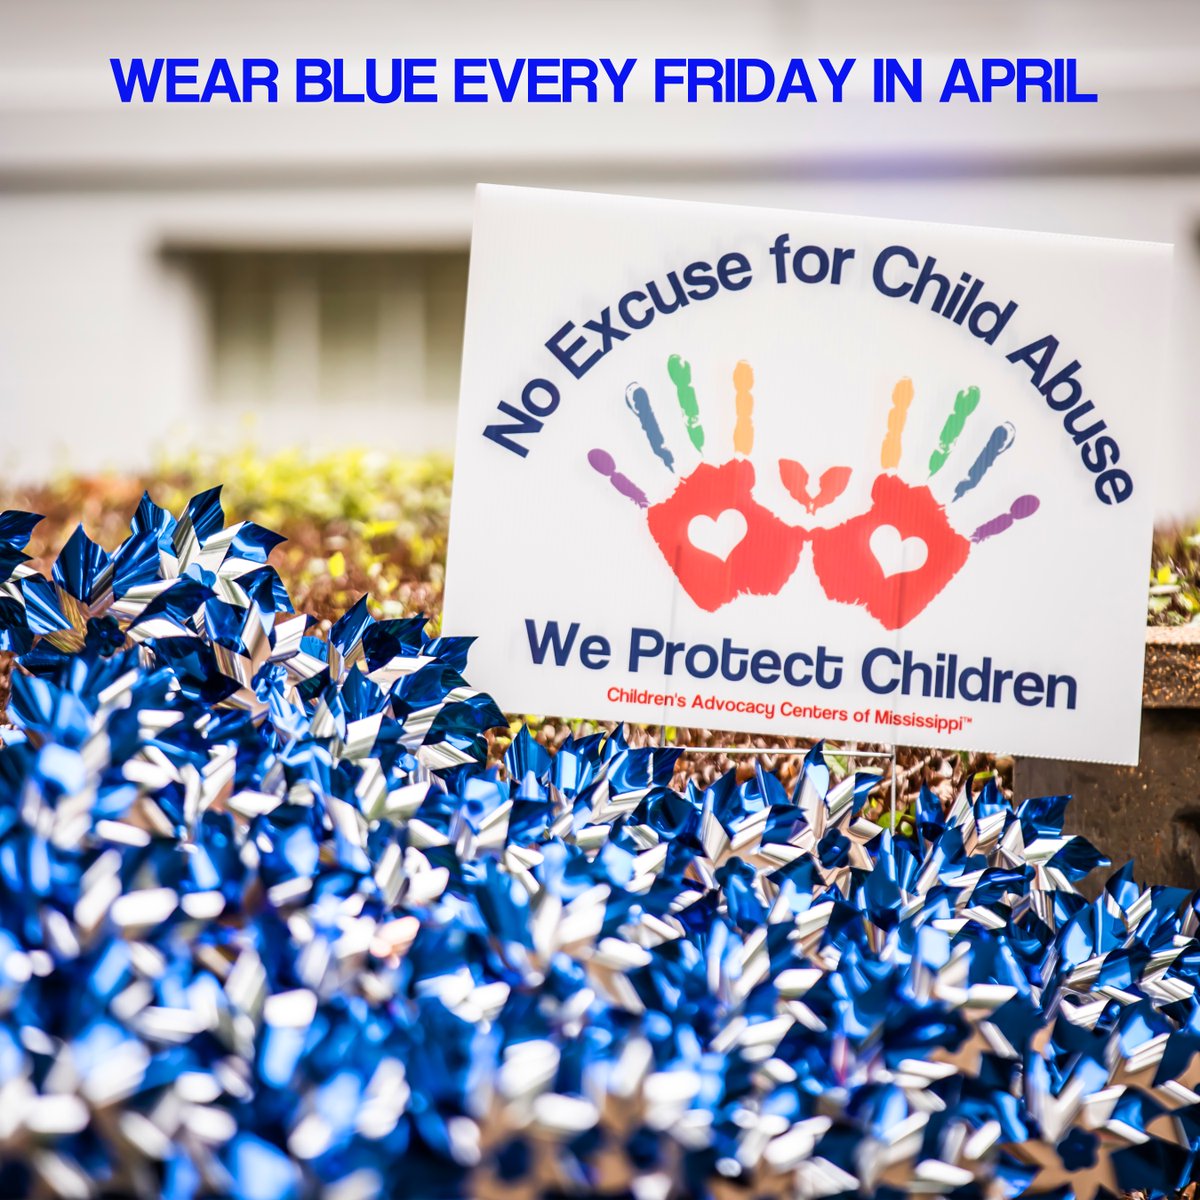 National Child Abuse Prevention month is going on now.

Wear BLUE on Fridays & be sure to take a photo & post on social media, tag CACM & your local CAC! 

Together we can change the lives of the children in MS.

#WearBlue #CACM #WeProtectChildren #ChildAbusePreventionMonth